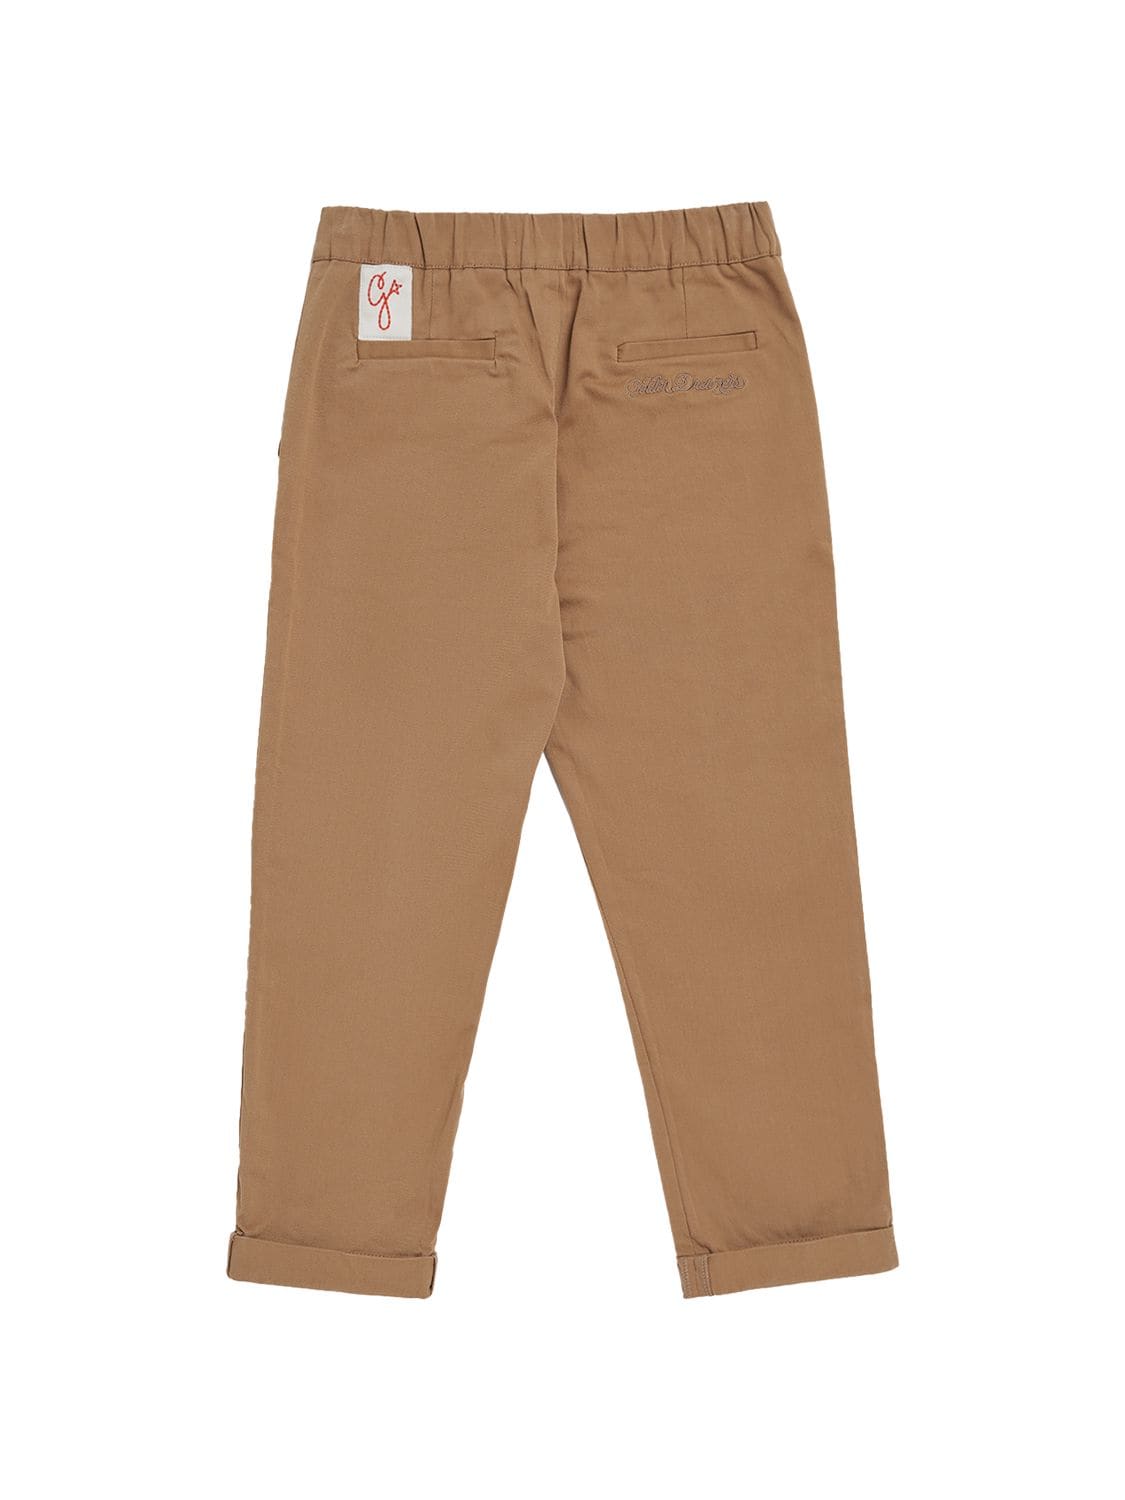 Shop Golden Goose Stretch Cotton Twill Chino Pants In Camel